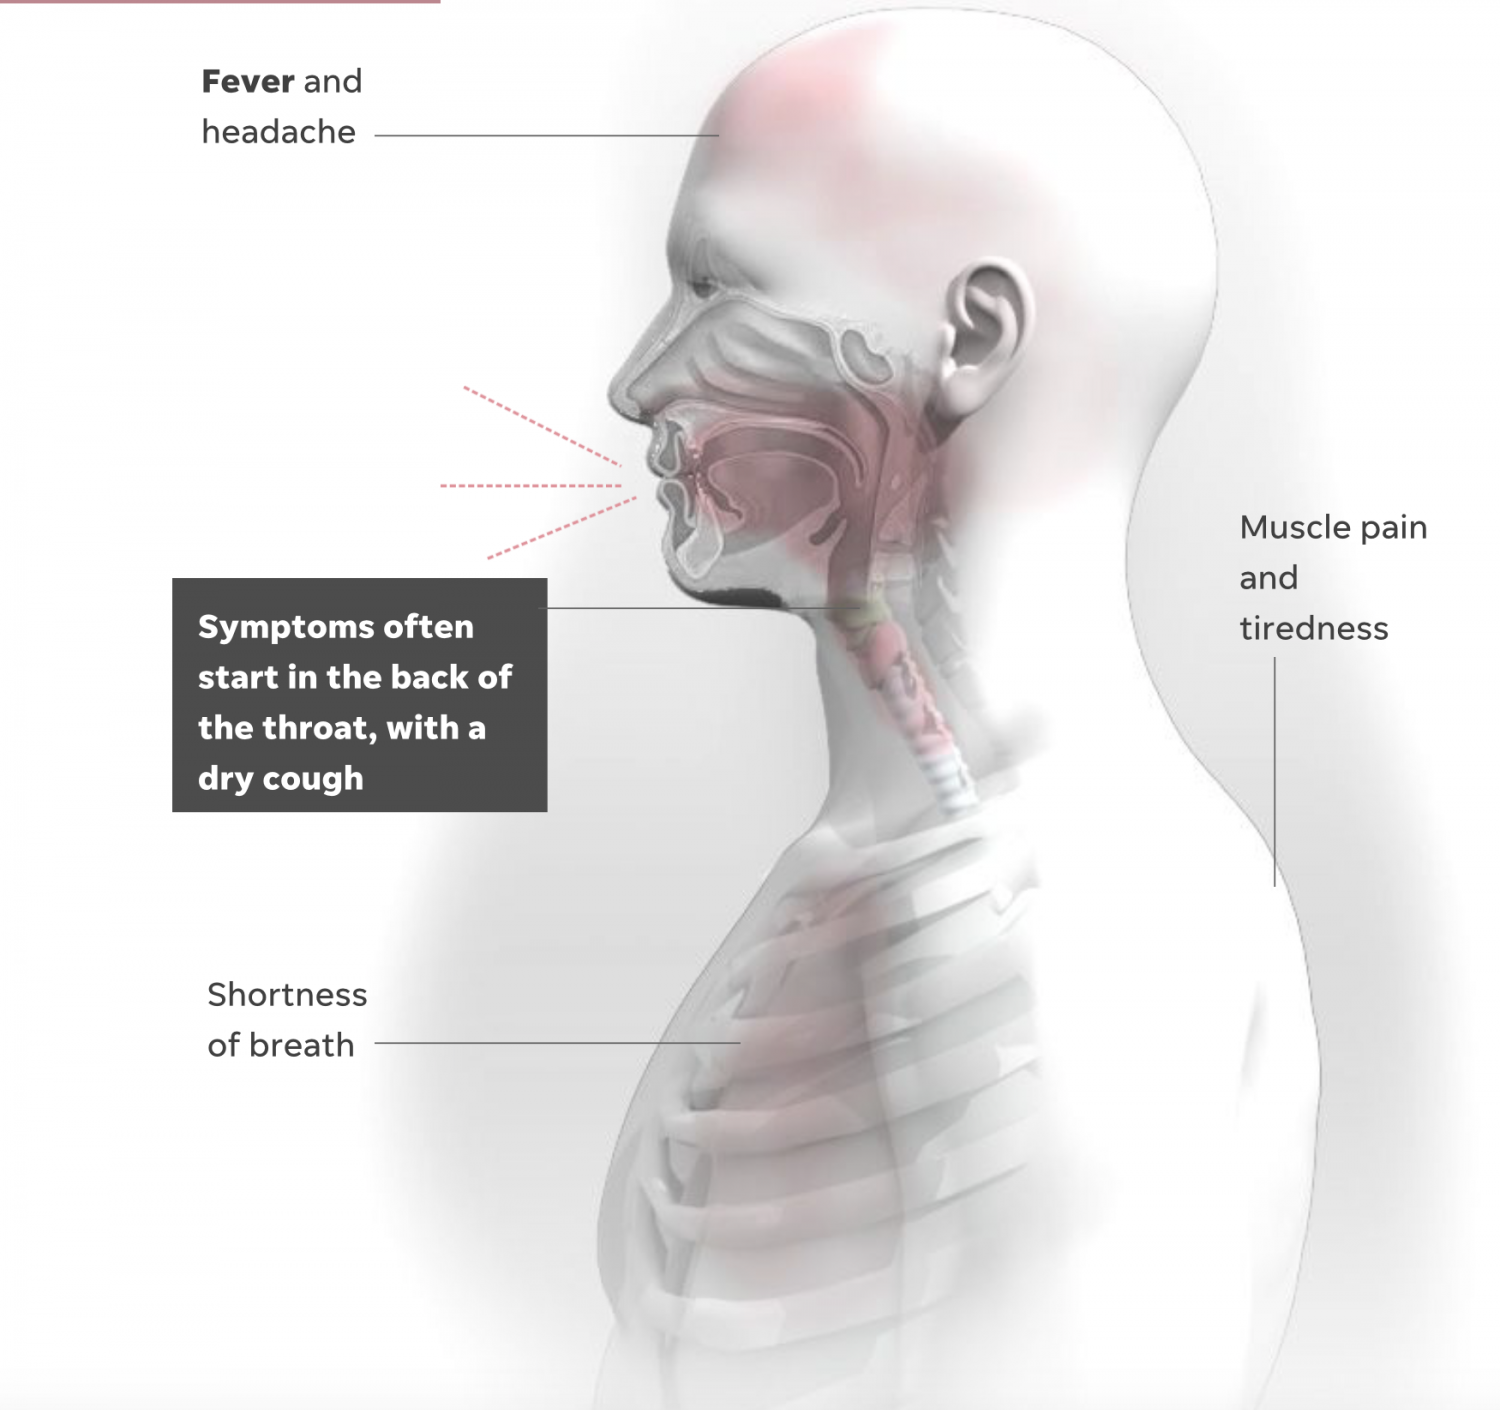 Symptoms often start in the back of the throat, with a dry cough